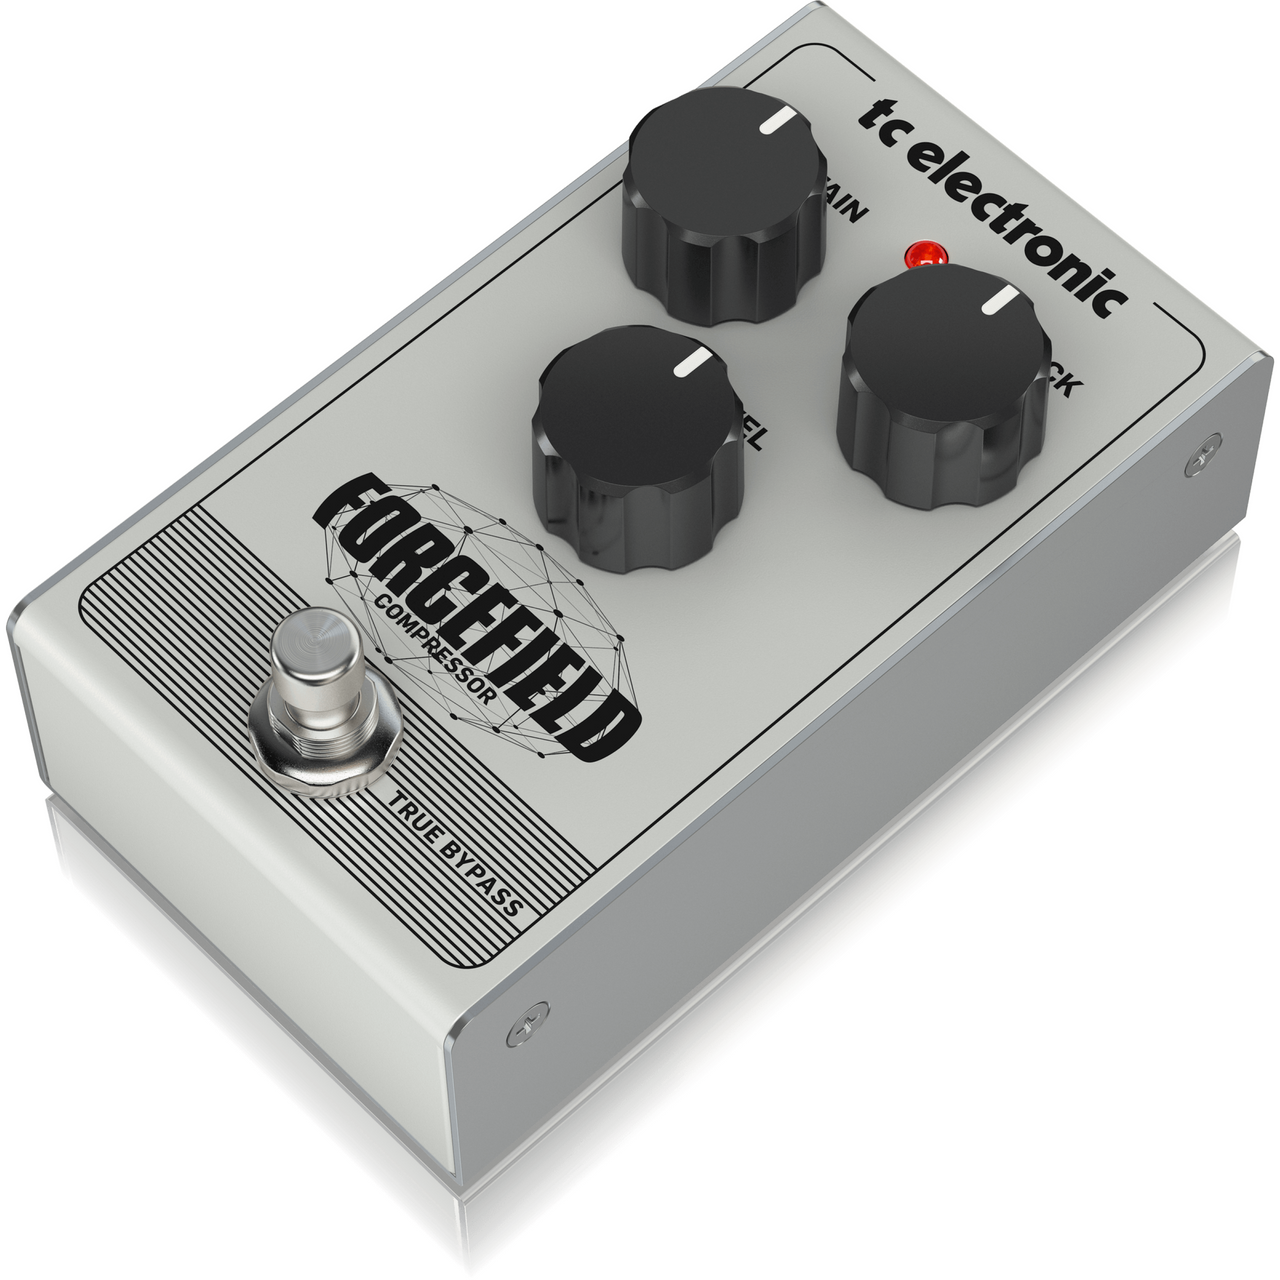 Pedal Tc Electronic Forcefield Compres Para Guitarra